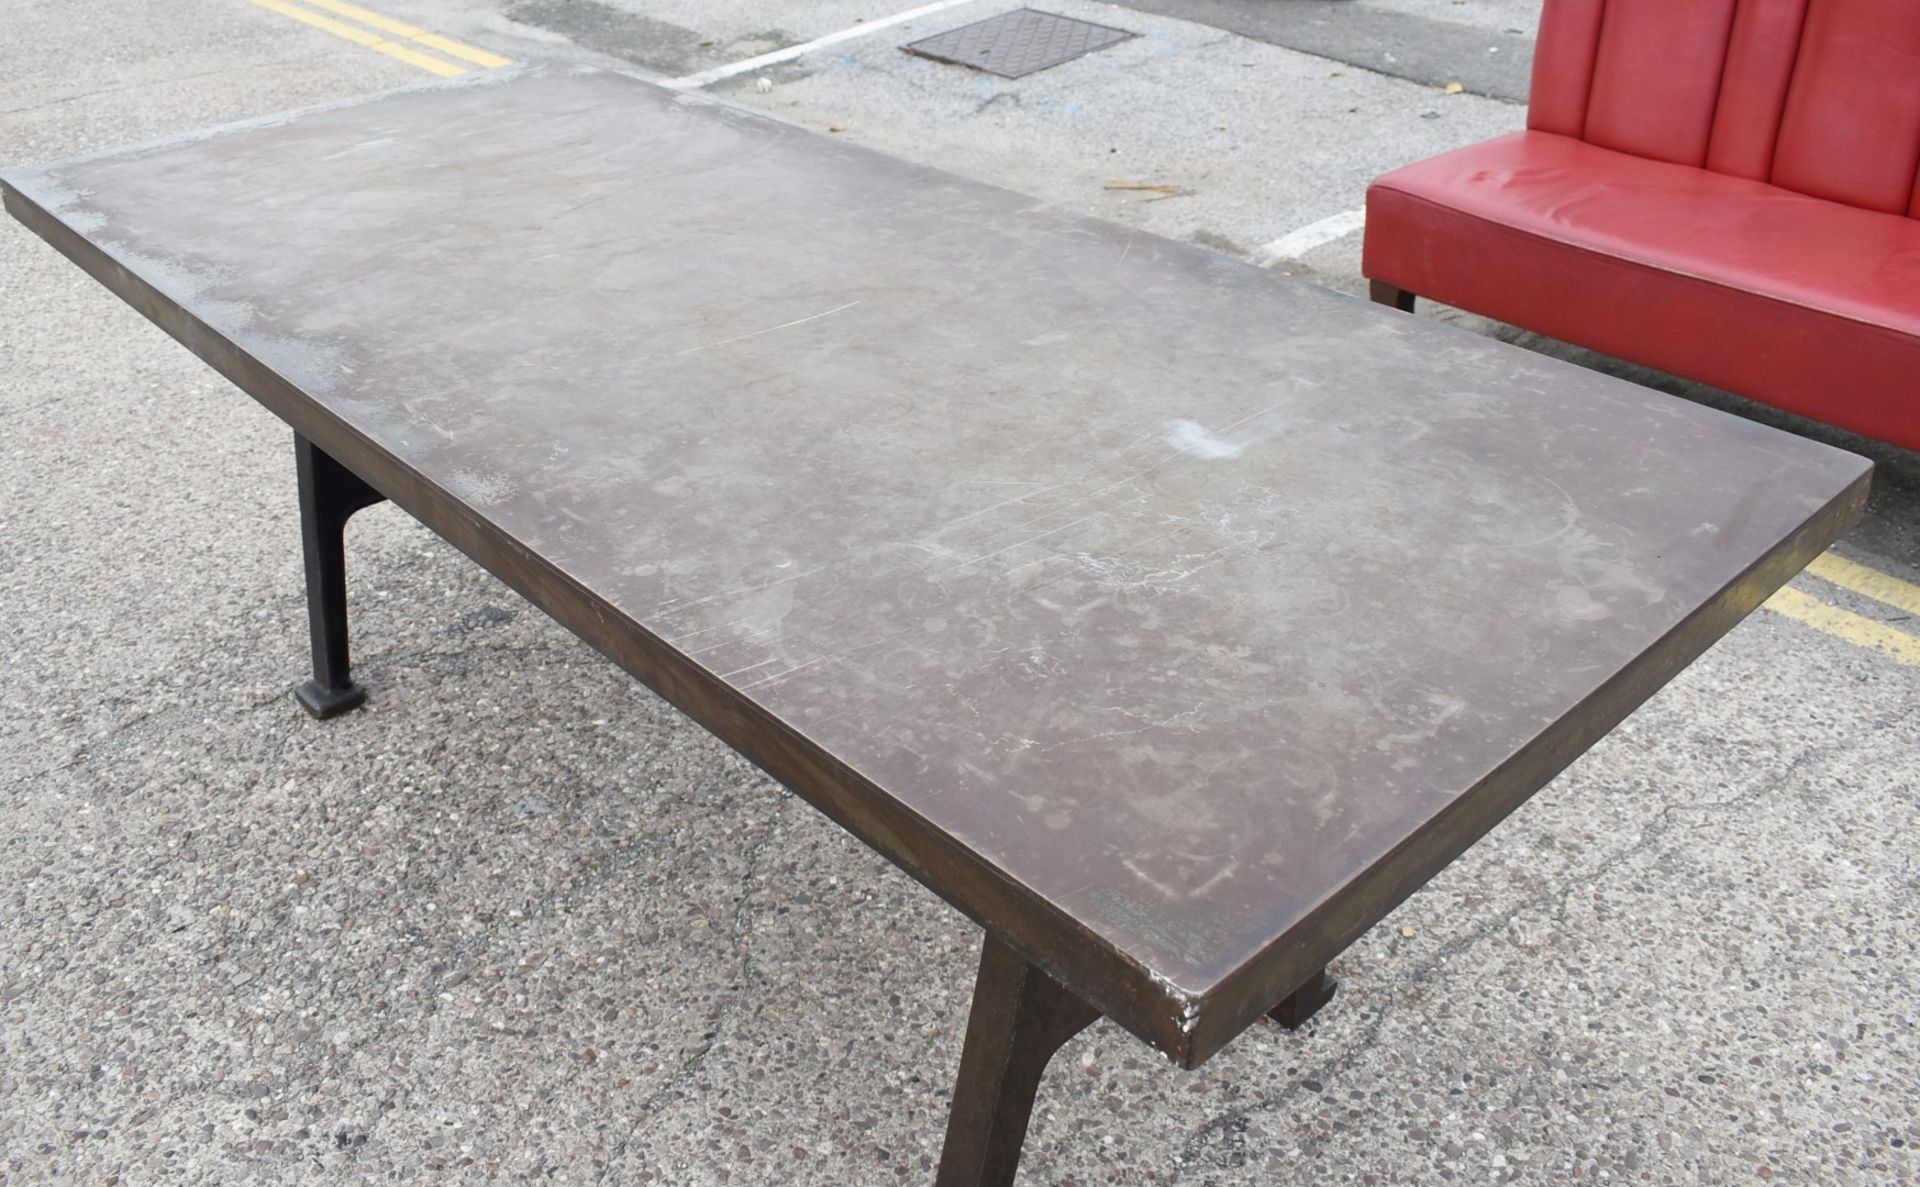 1 x Industrial Style 200cm Banquetting Restaurant Table Featuring a Heavy Steel Top & Steel Legs - Image 15 of 23